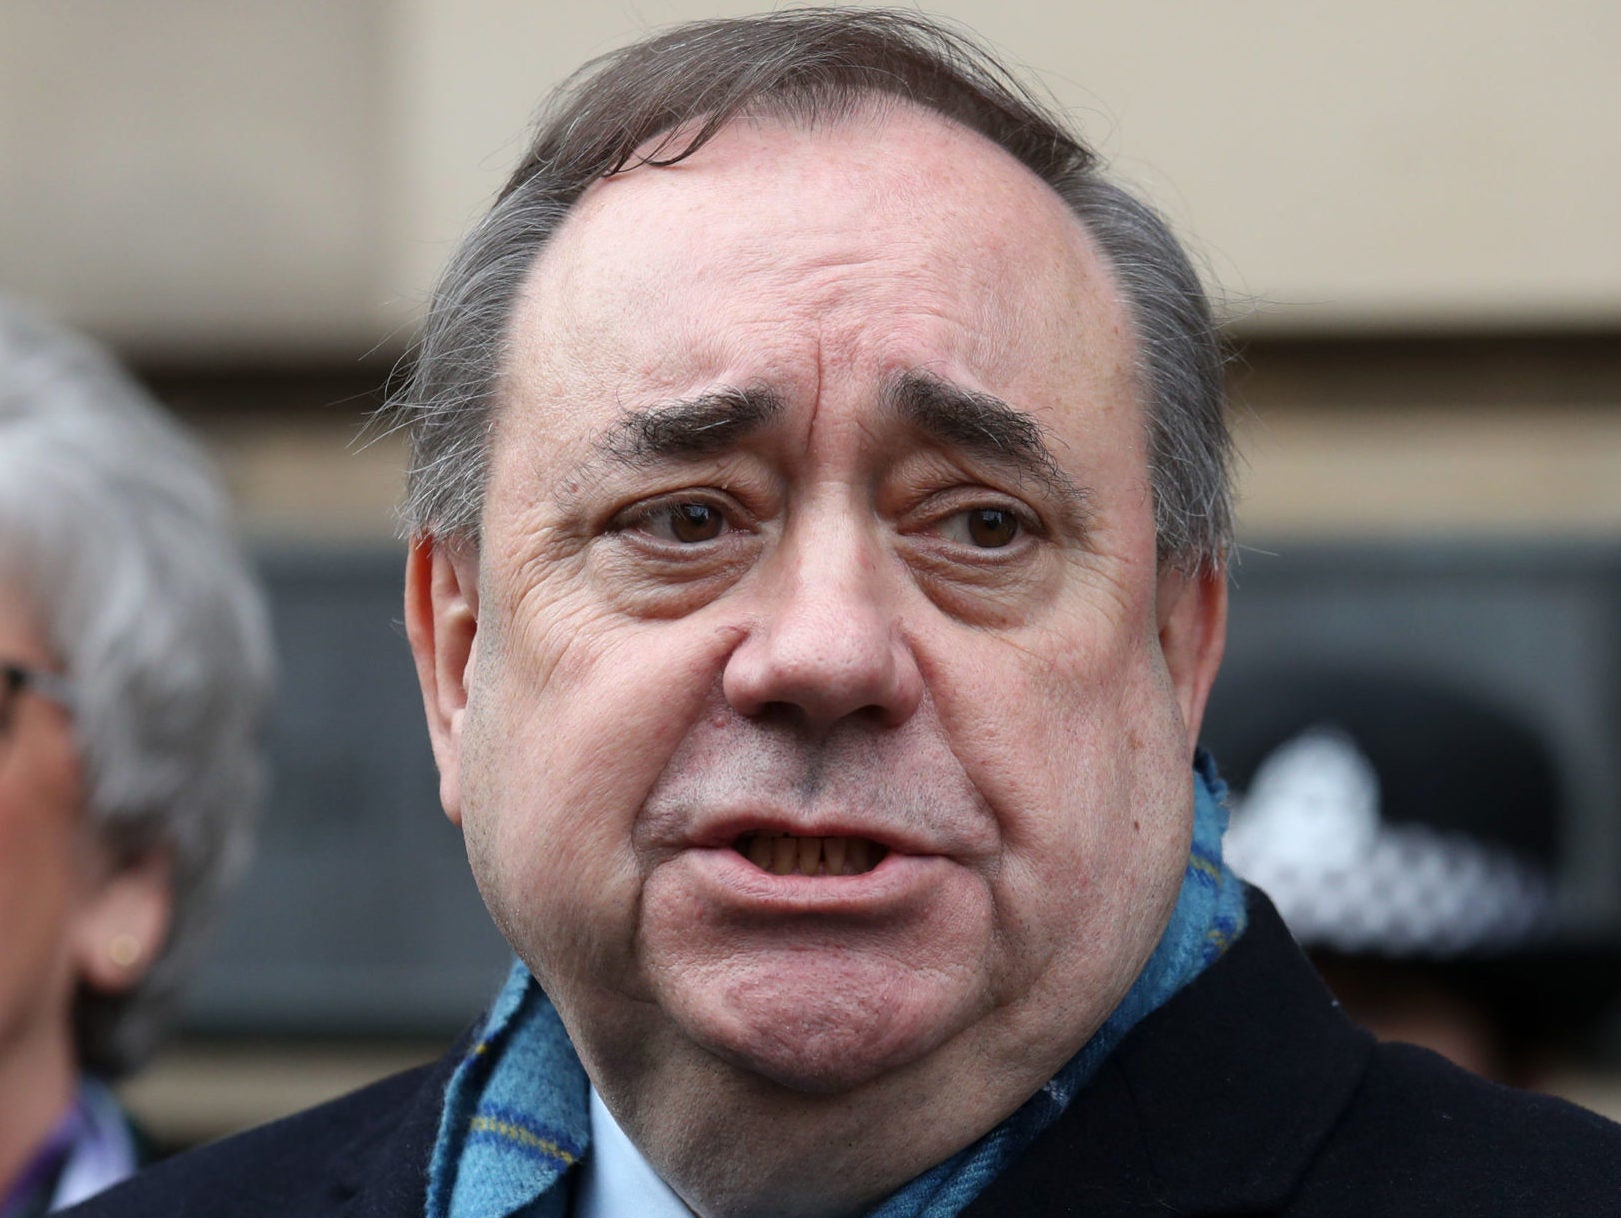 Blogger jailed for 'abhorrent' contempt of court over Alex Salmond trial coverage